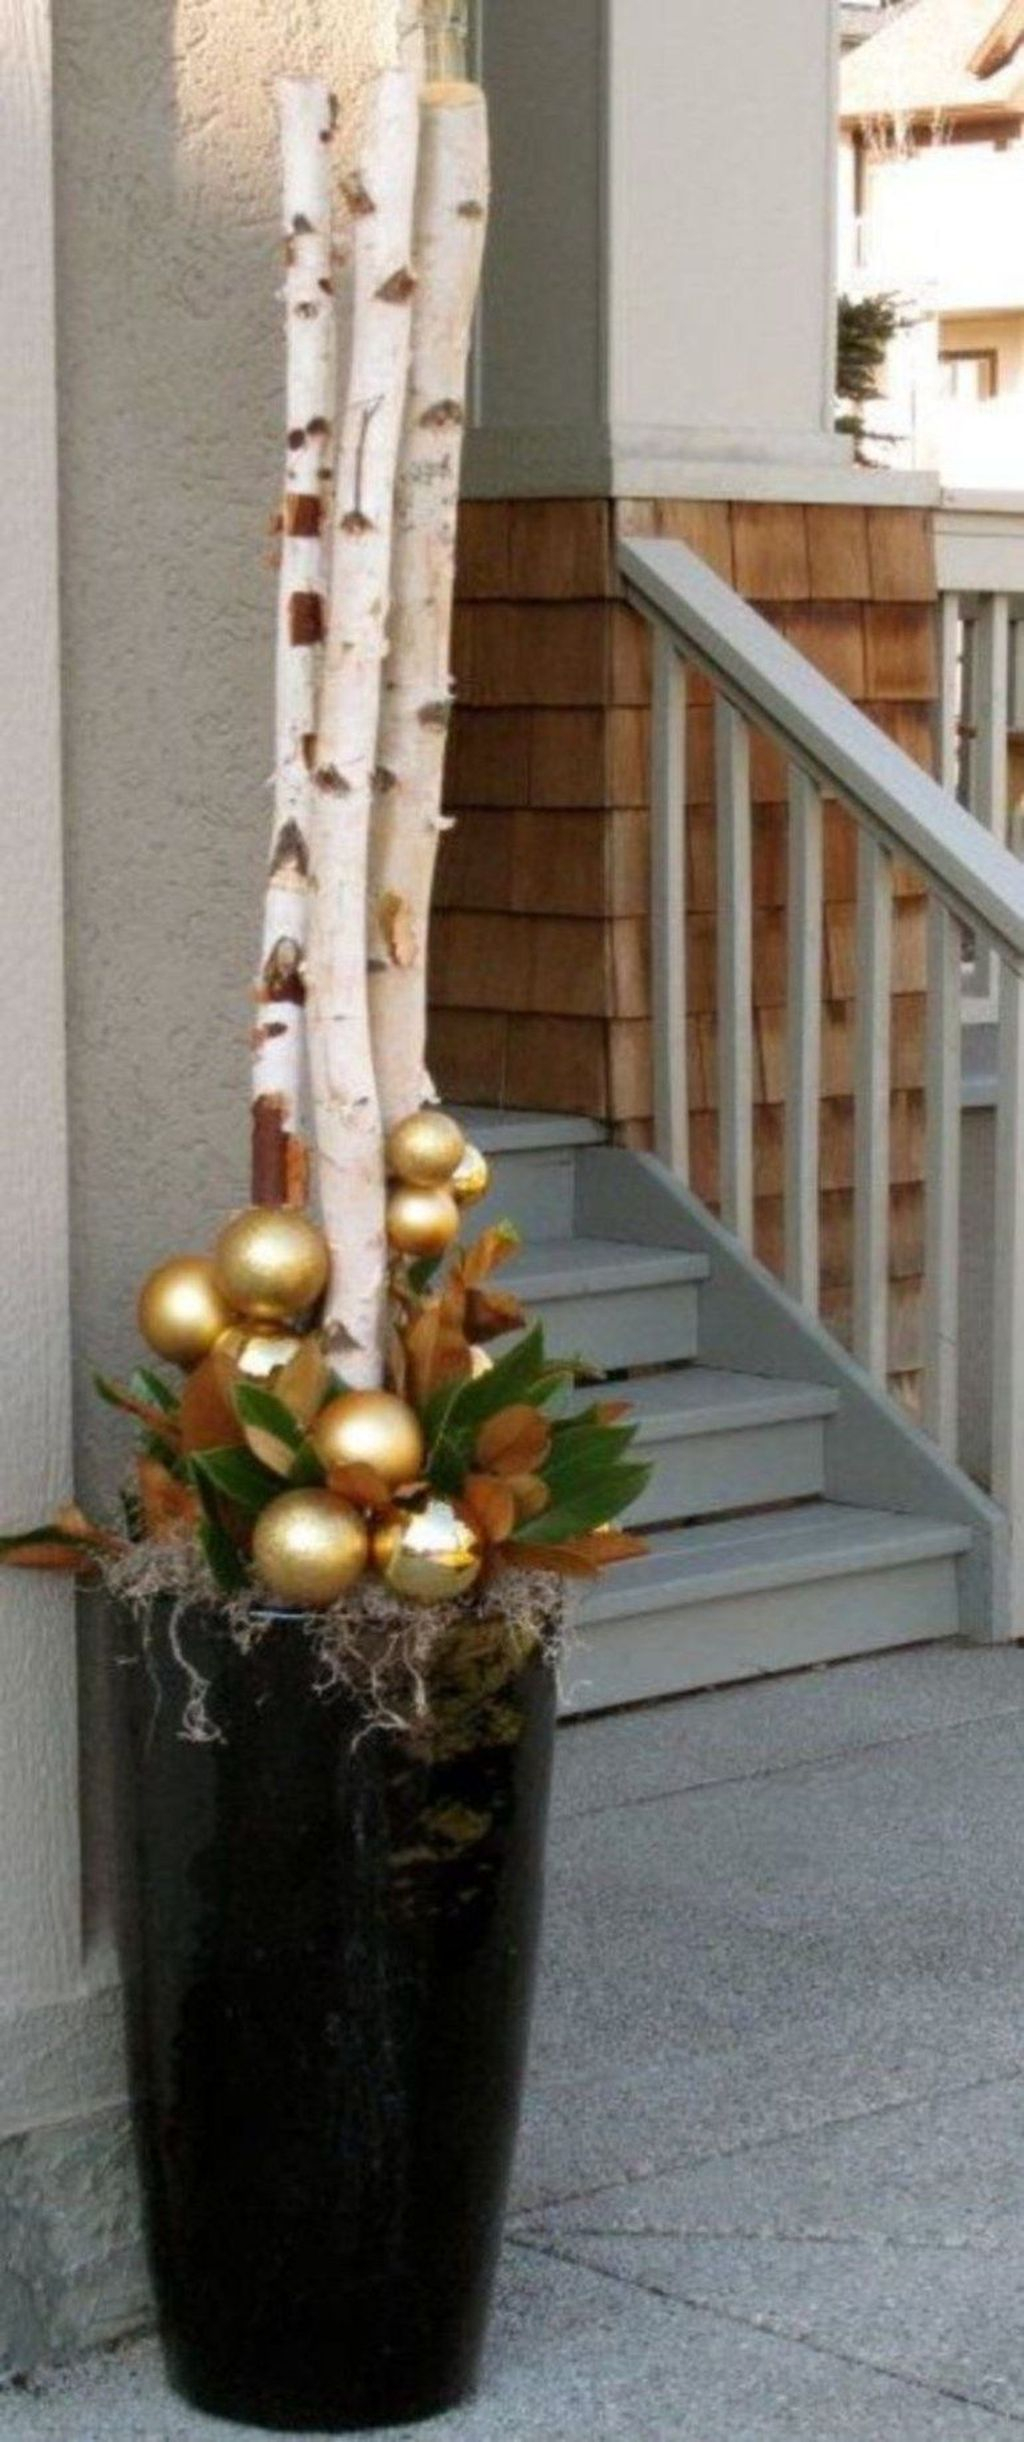 Marvelous Outdoor Holiday Planter Ideas To Beauty Porch Décor 32